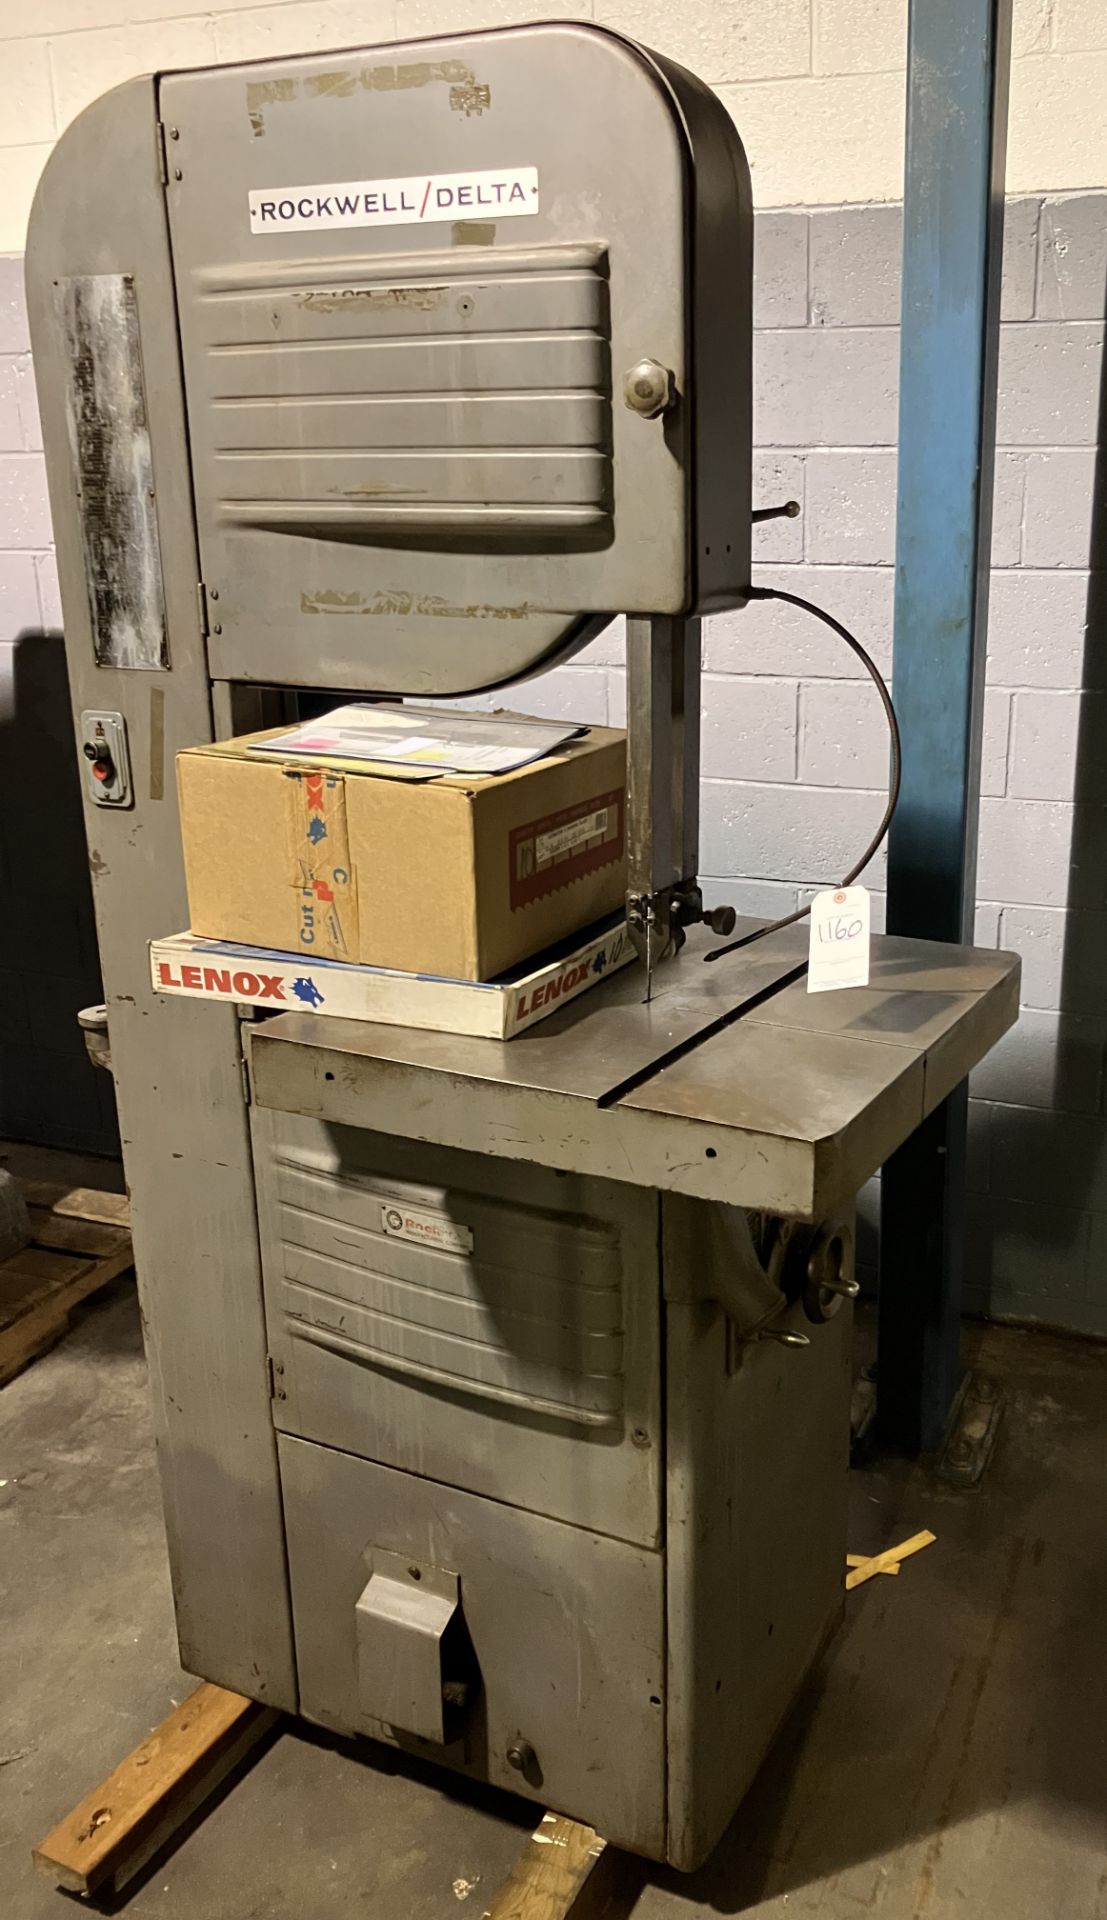 Rockwell Delta Mod. 28-365, 20" Verticle Band Saw w/ Blade Welding Attachment, S.N. 1485729